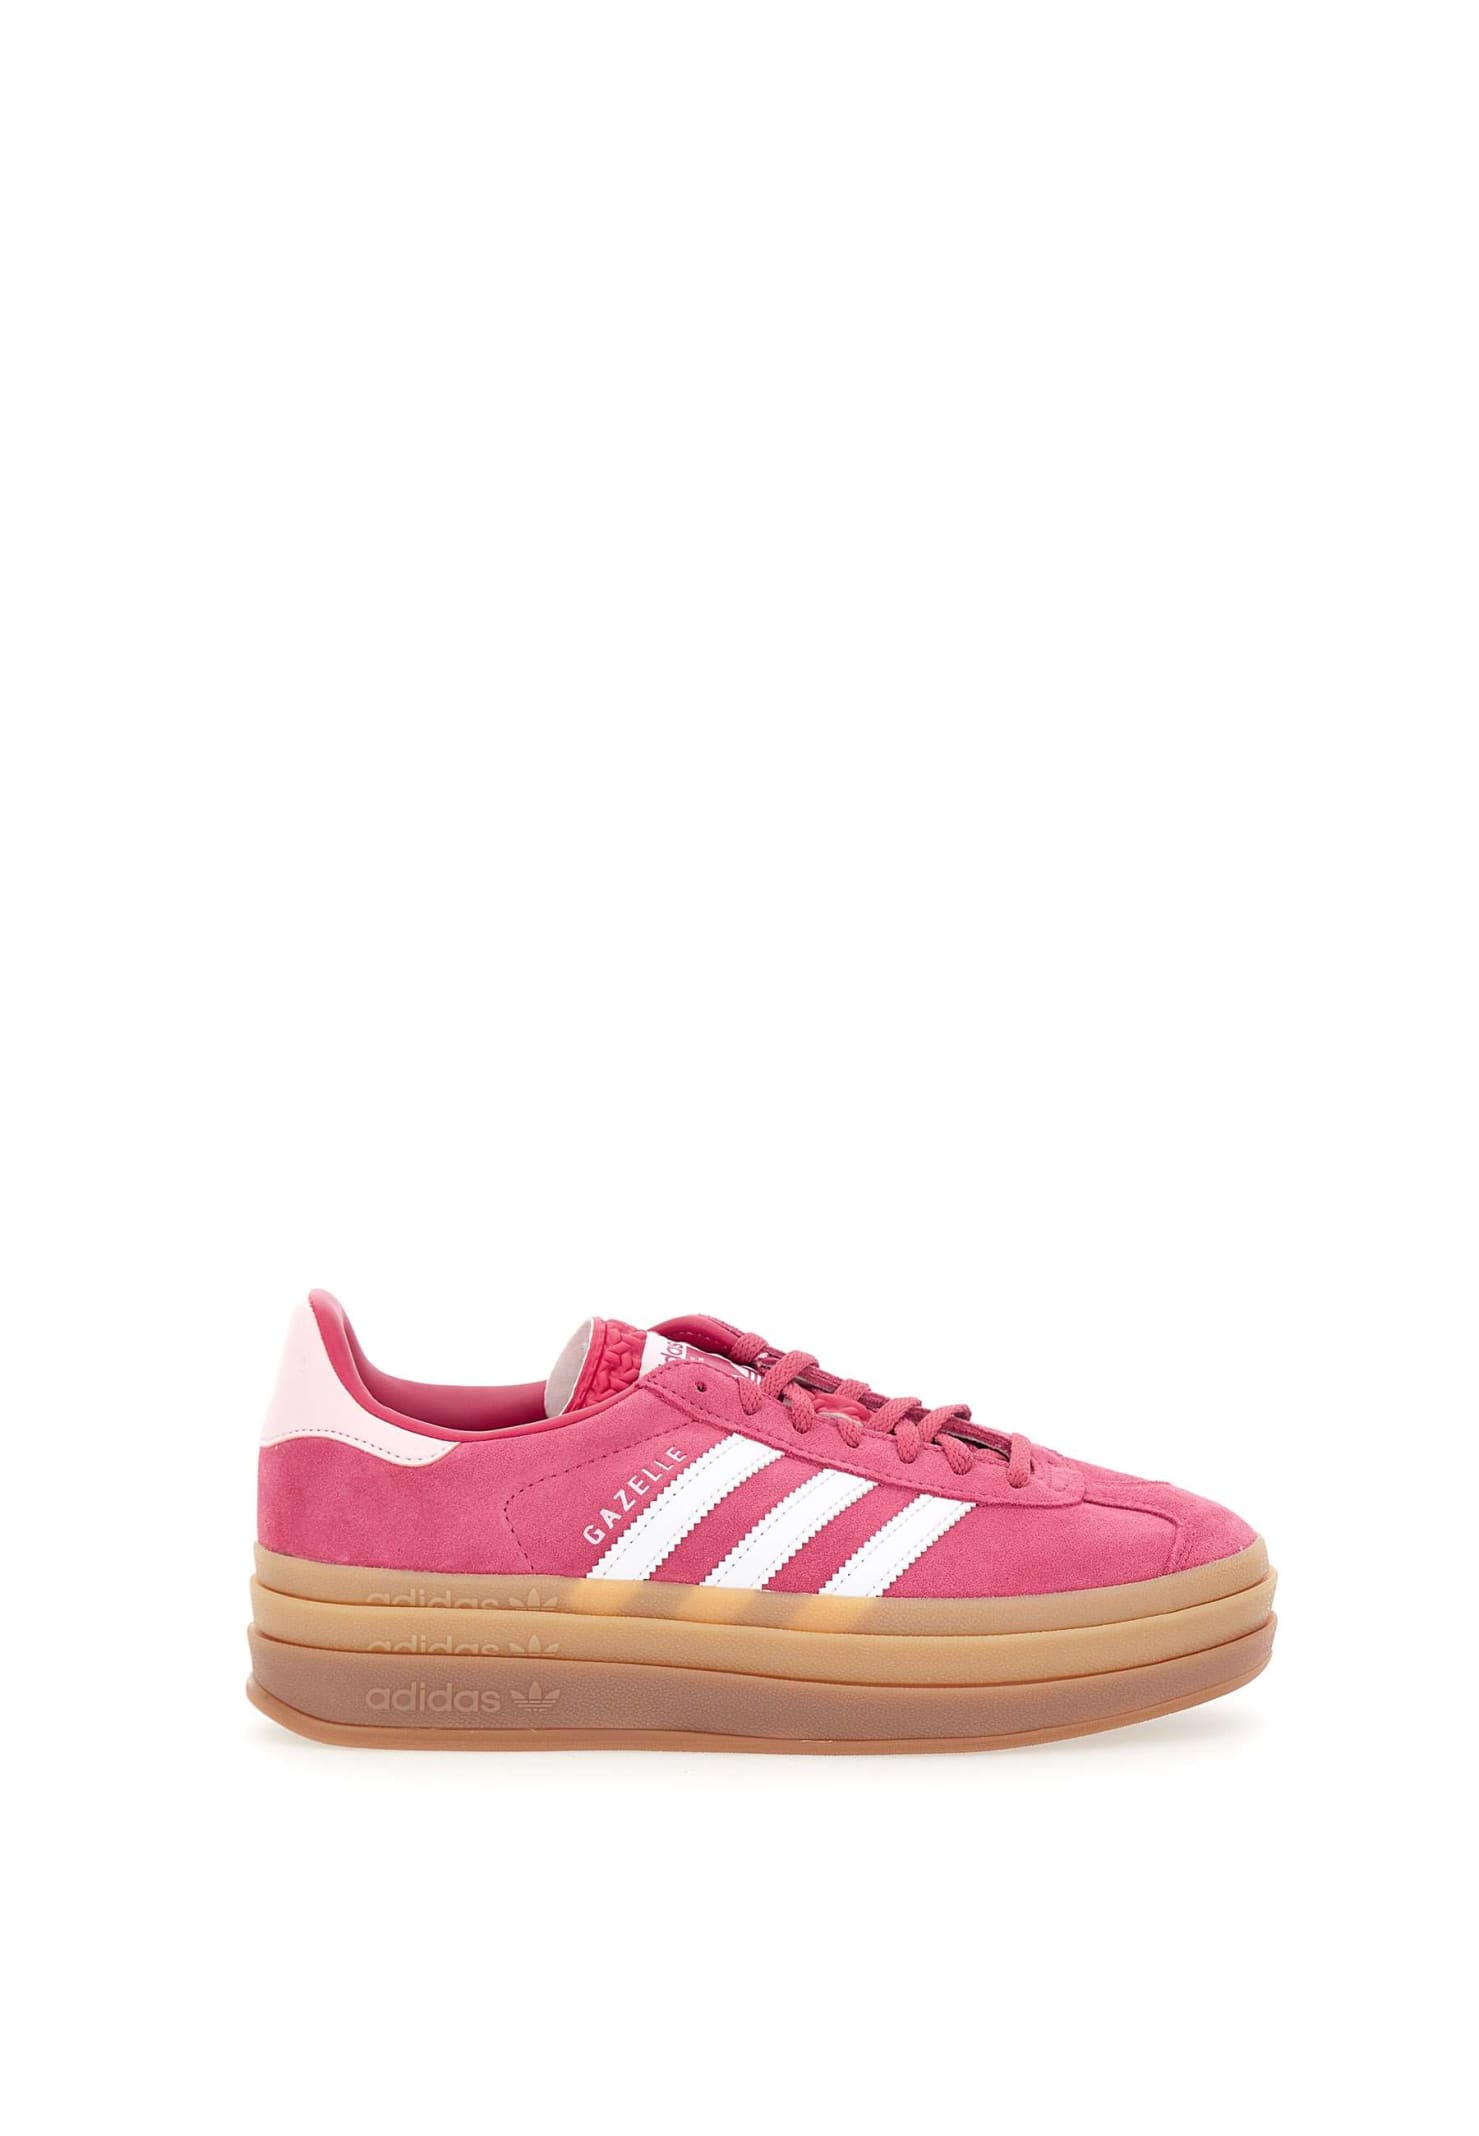 ADIDAS ORIGINALS GAZZELLE BOLD W LEATHER SNEAKERS